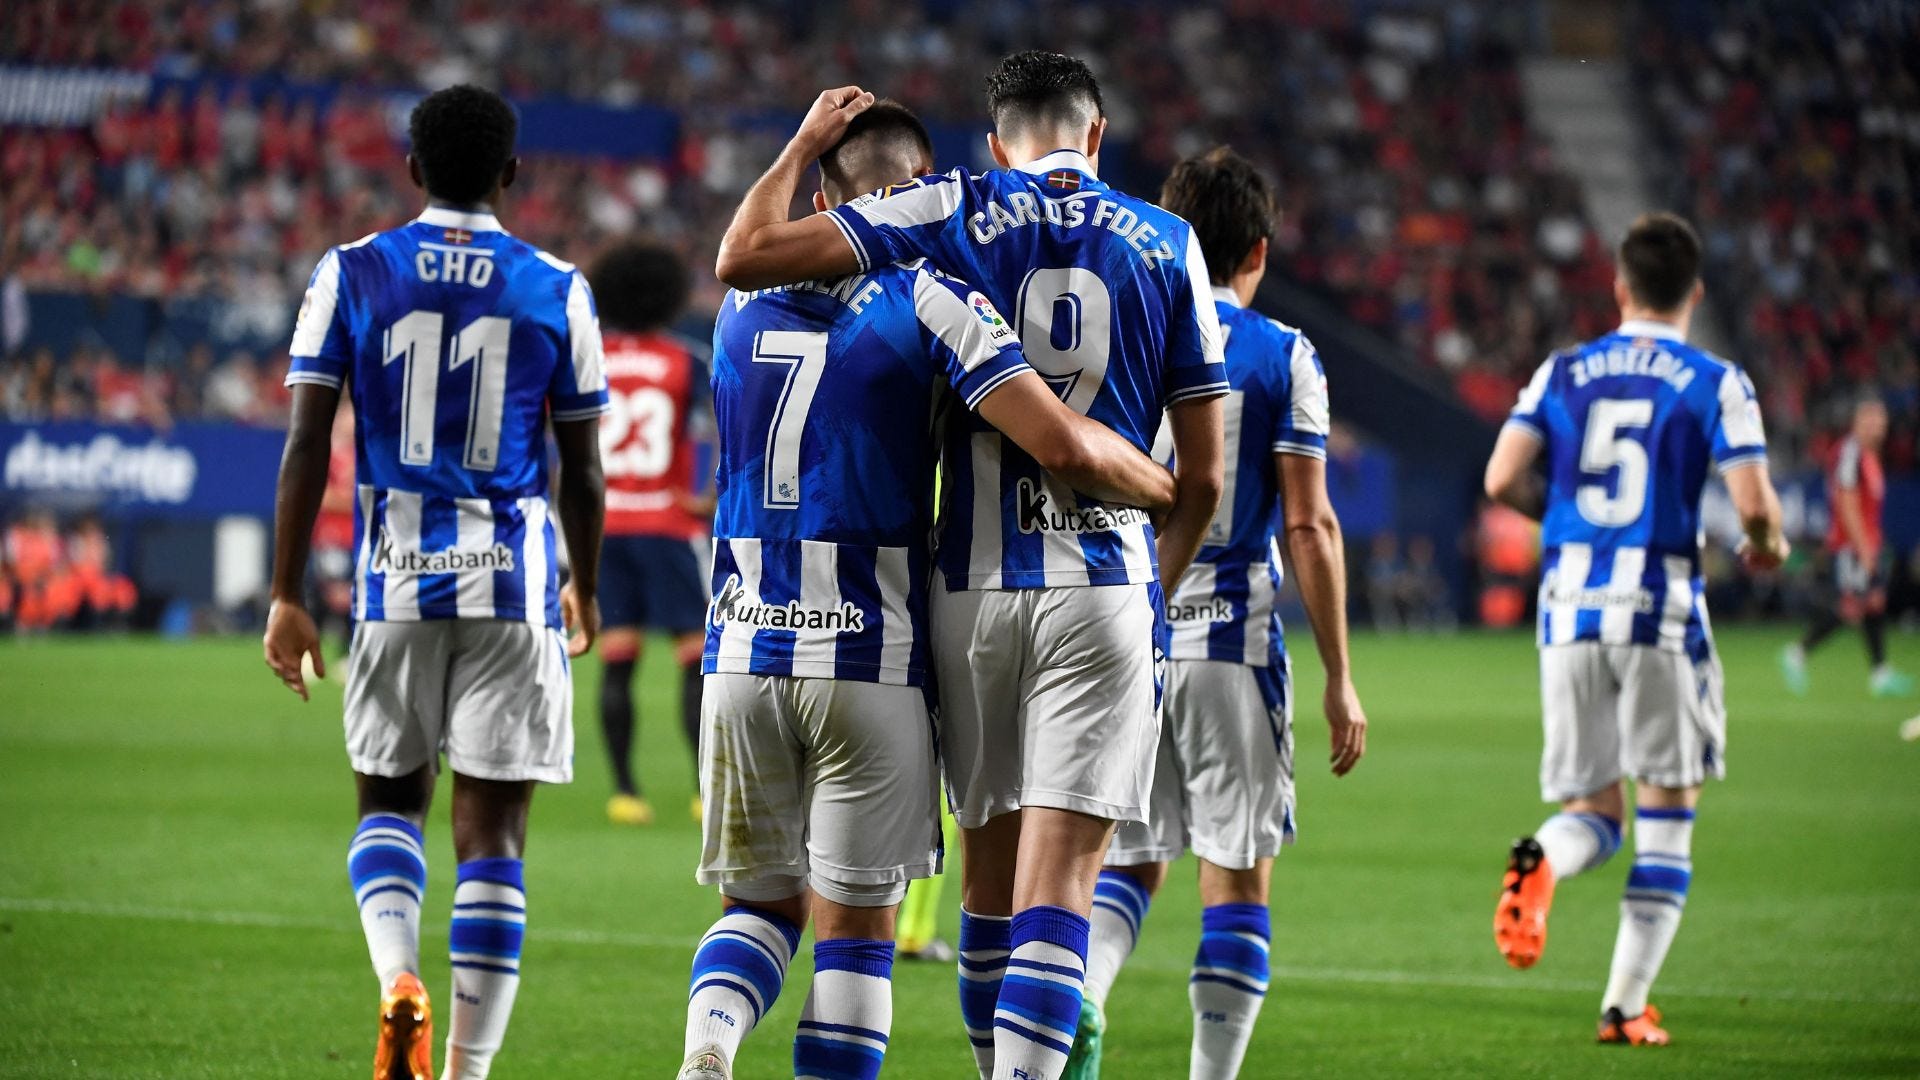 Real Sociedad vs Real Madrid Where to watch the match online, live stream, TV channels and kick-off time Goal US